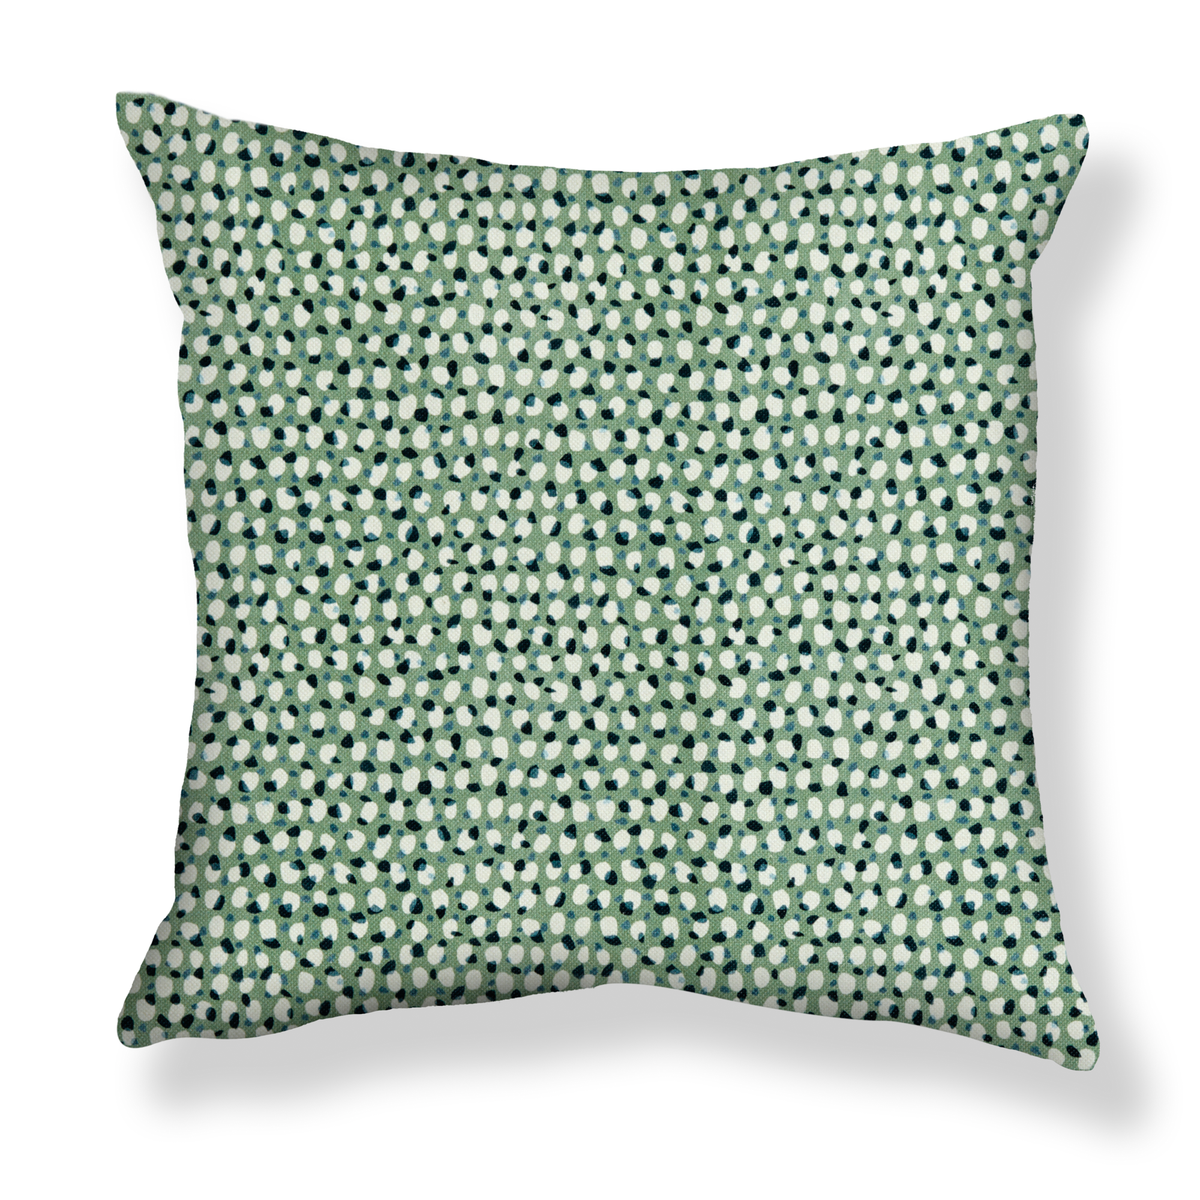 Scattered Dot Pillow in Green